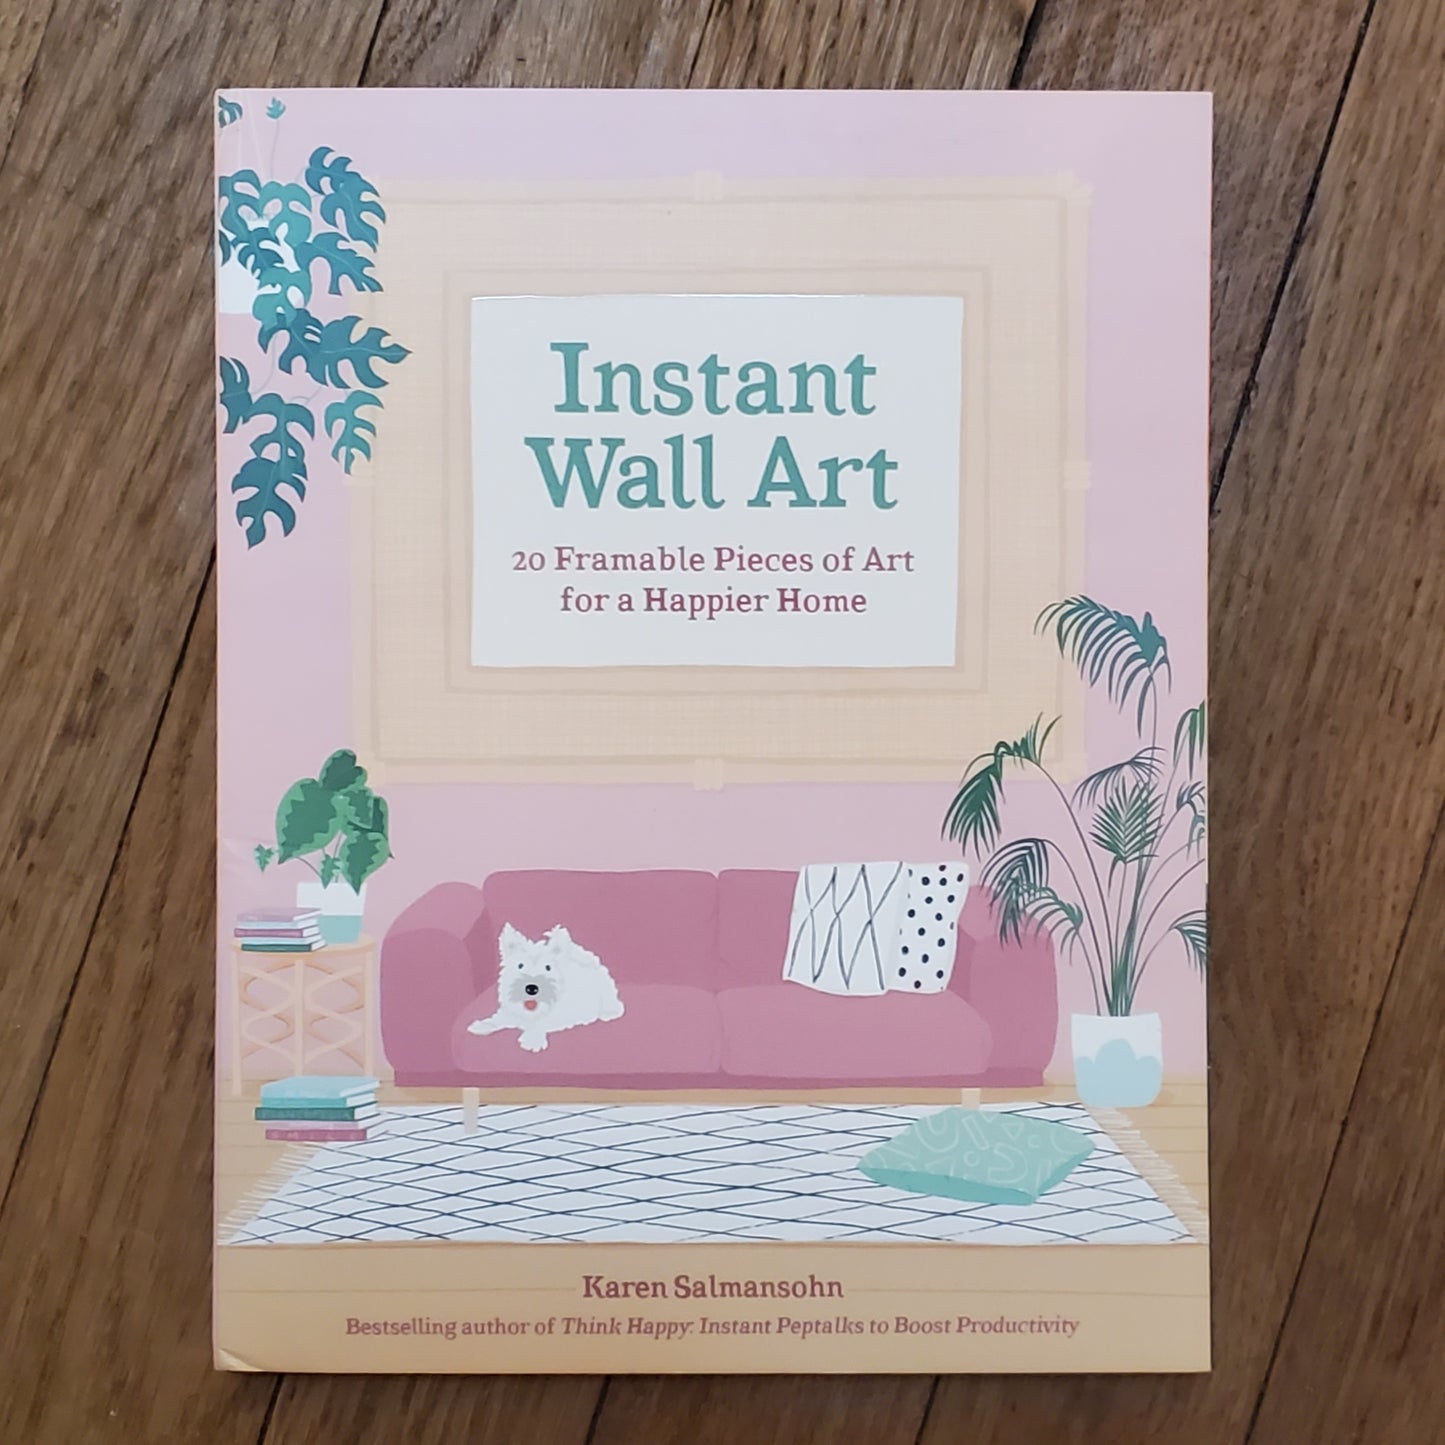 GB Instant Wall Art: 20 Framable Pieces of Art for a Happier Home